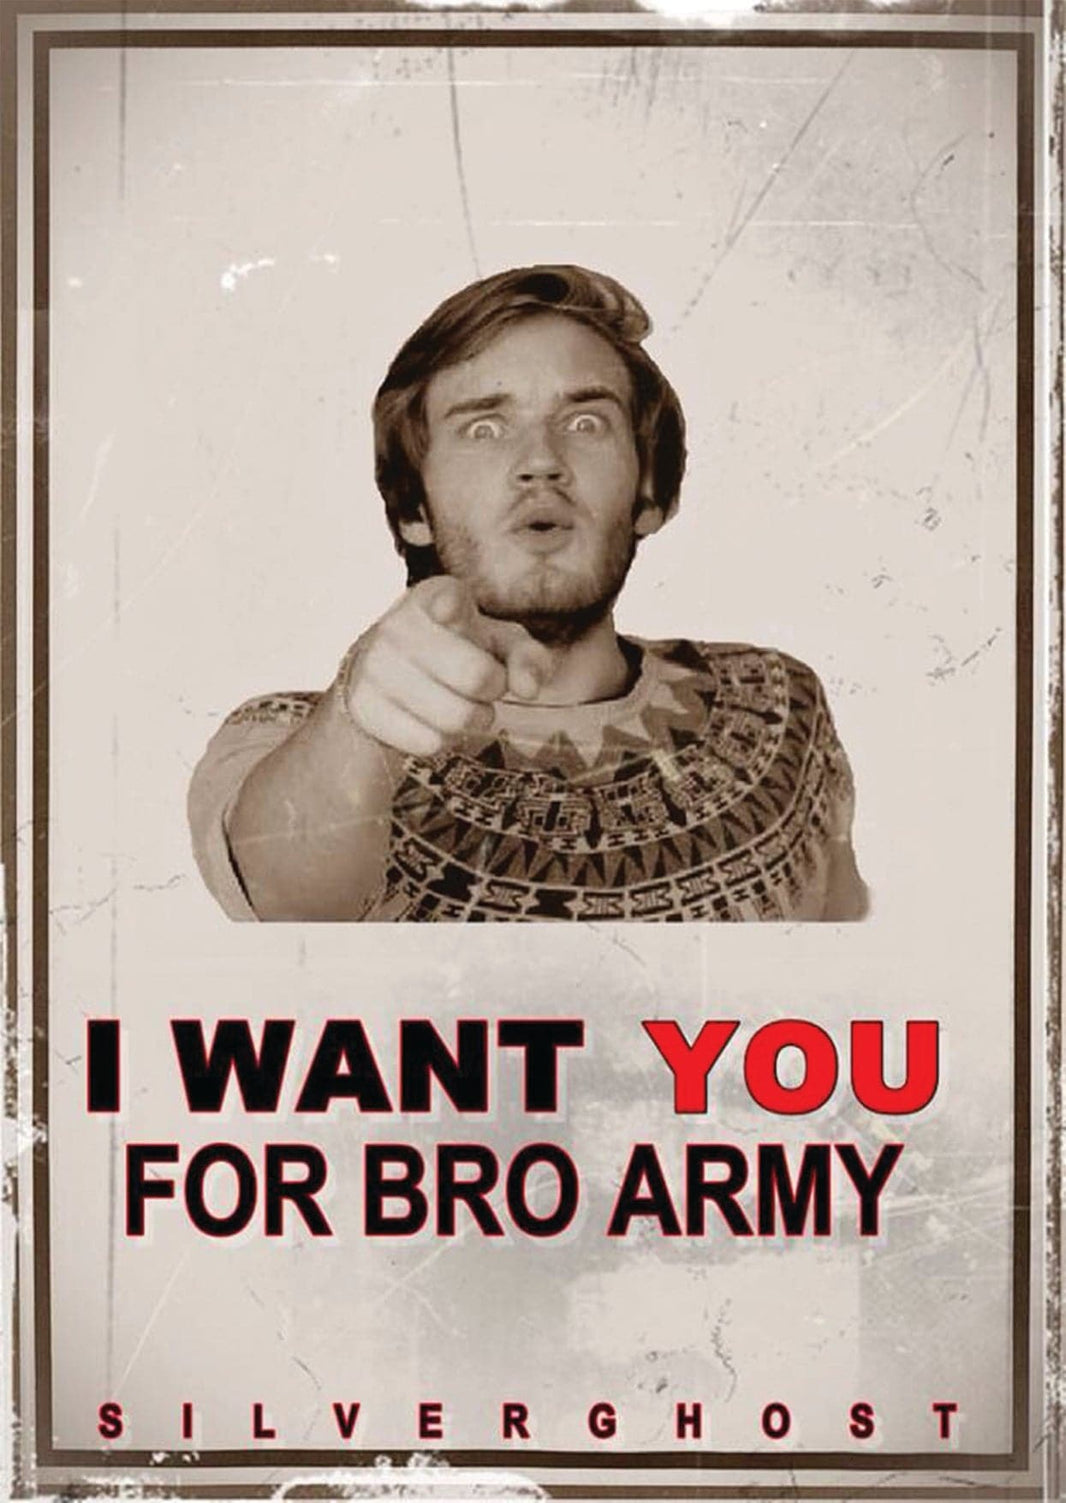 I want you for bro army